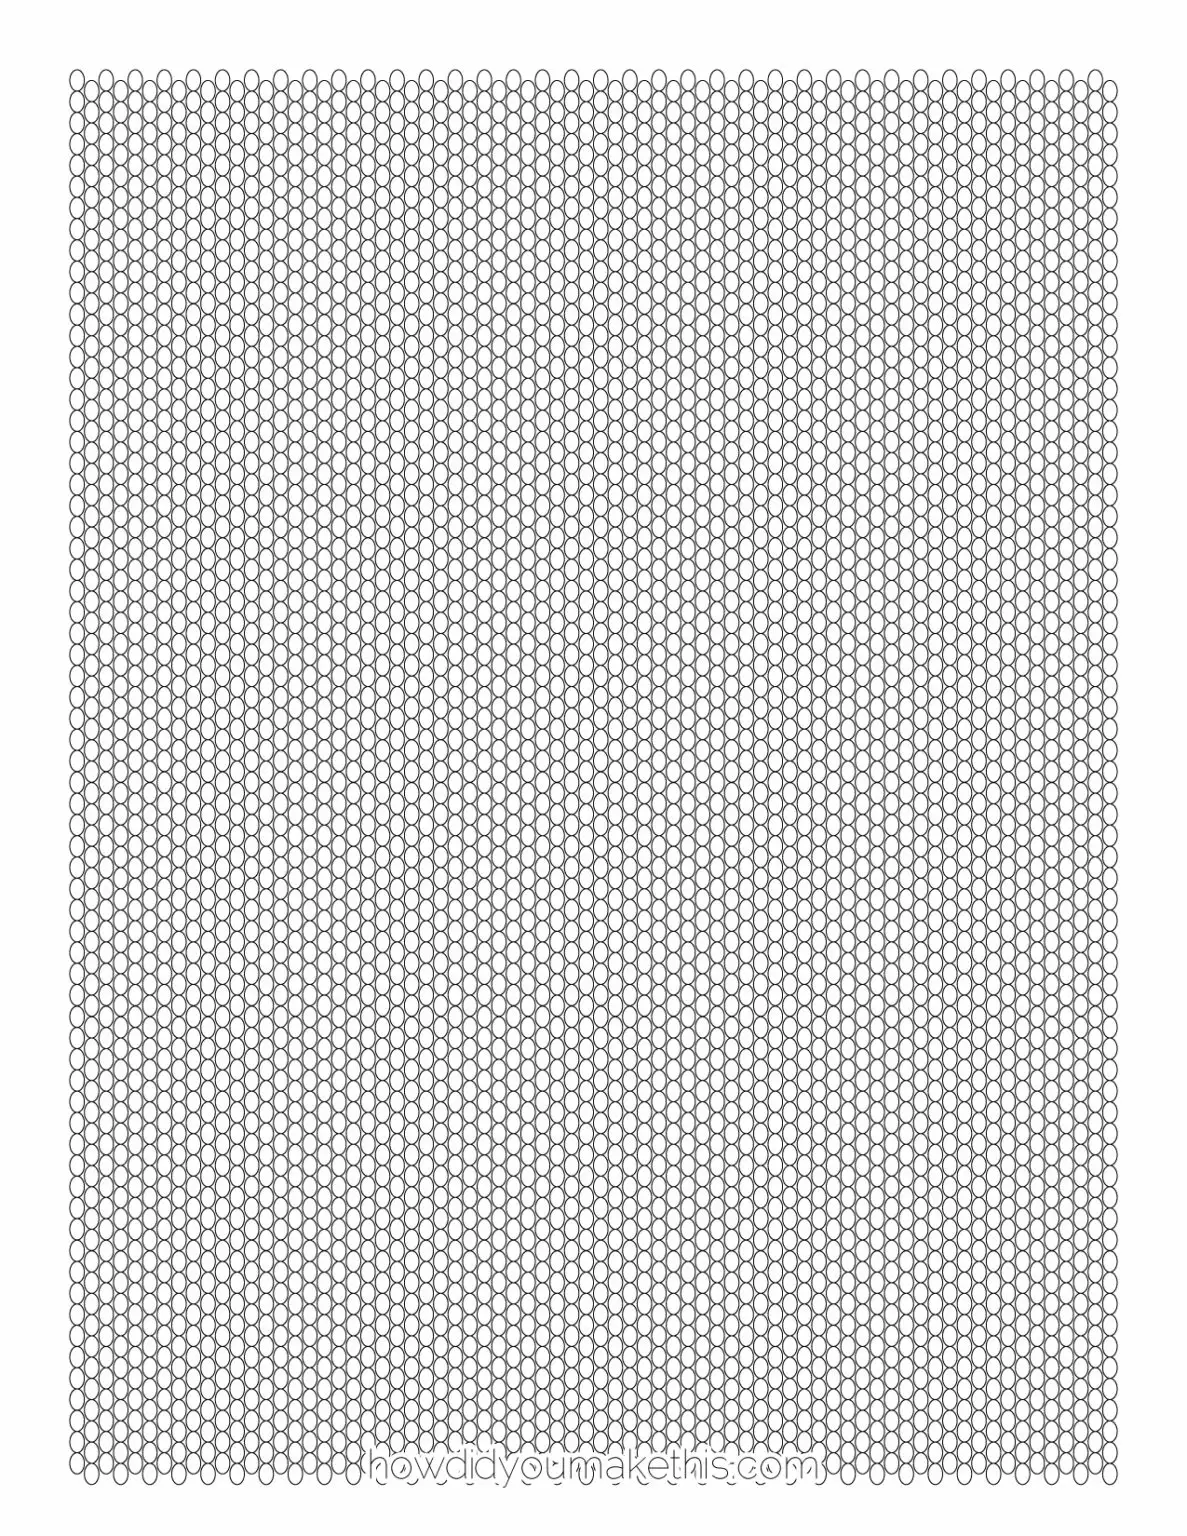 Free Printable Seed Bead Graph Paper Template in PDF